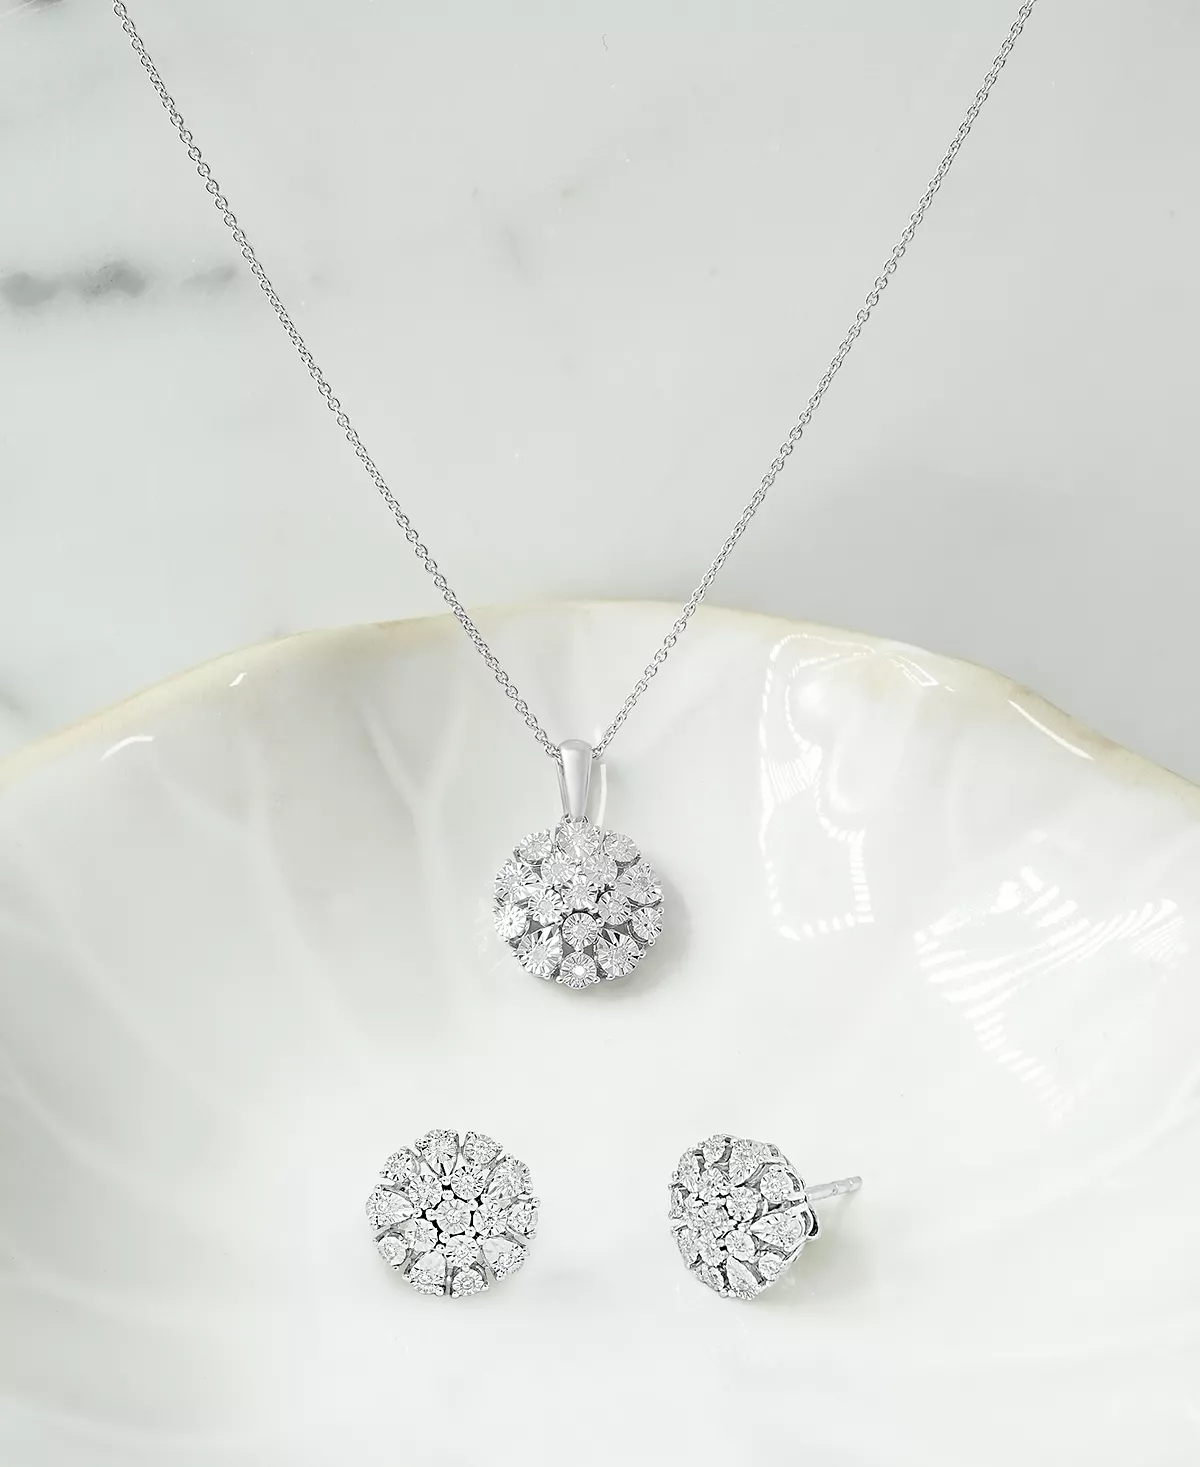 Macy's Diamond Flower Burst Stud Earrings & Pendant Necklace Collection in Sterling Silver Discounts and Cashback